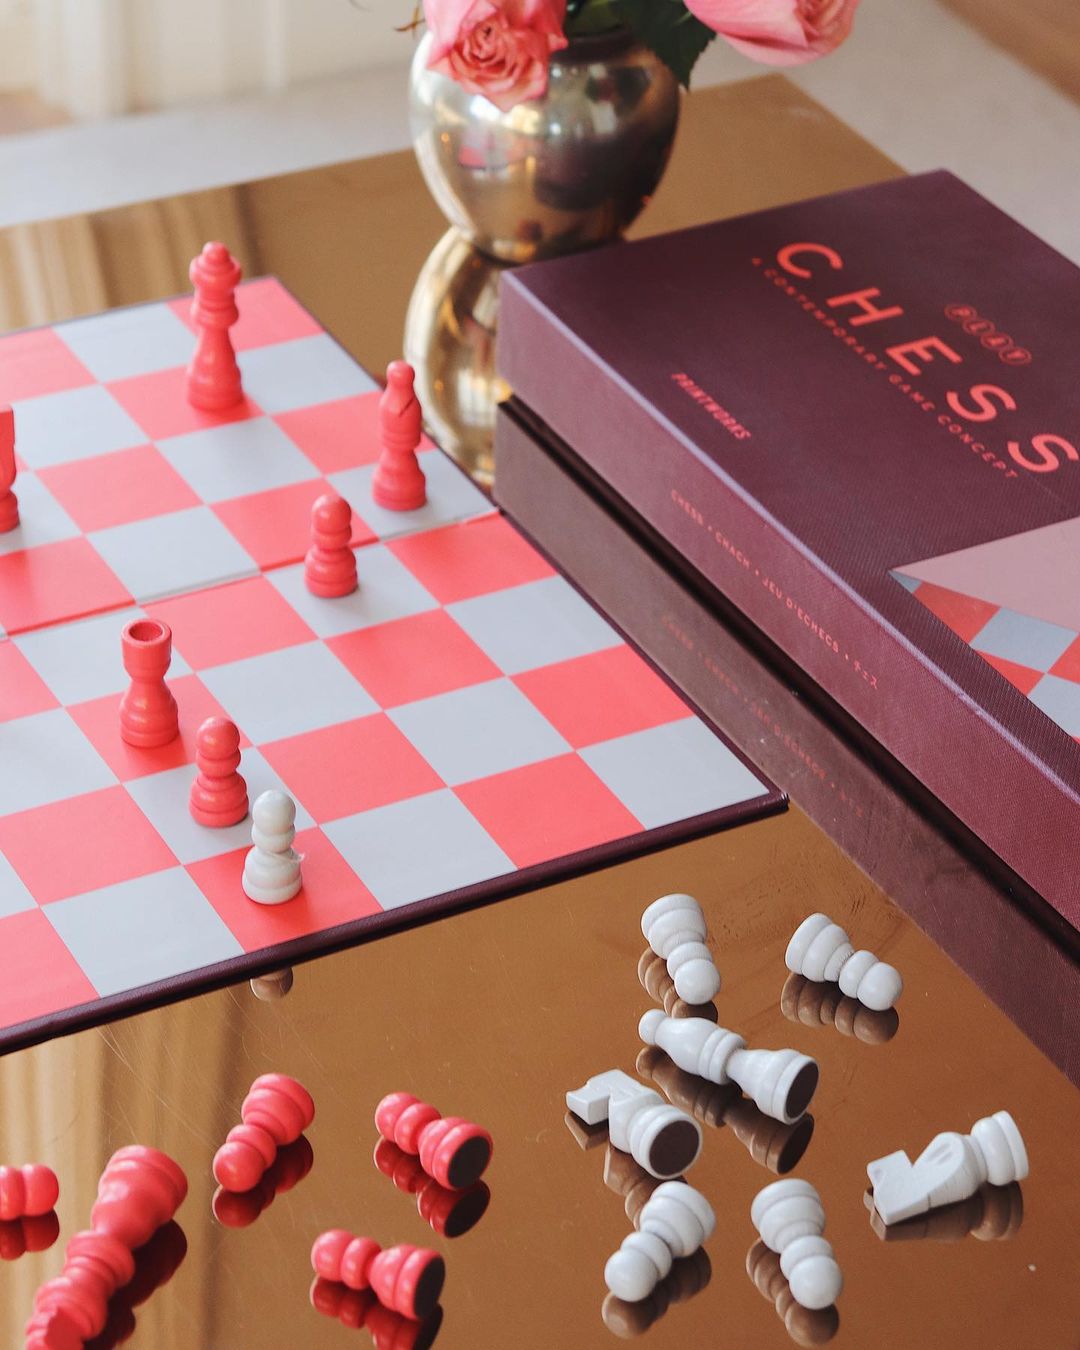 Pink chess